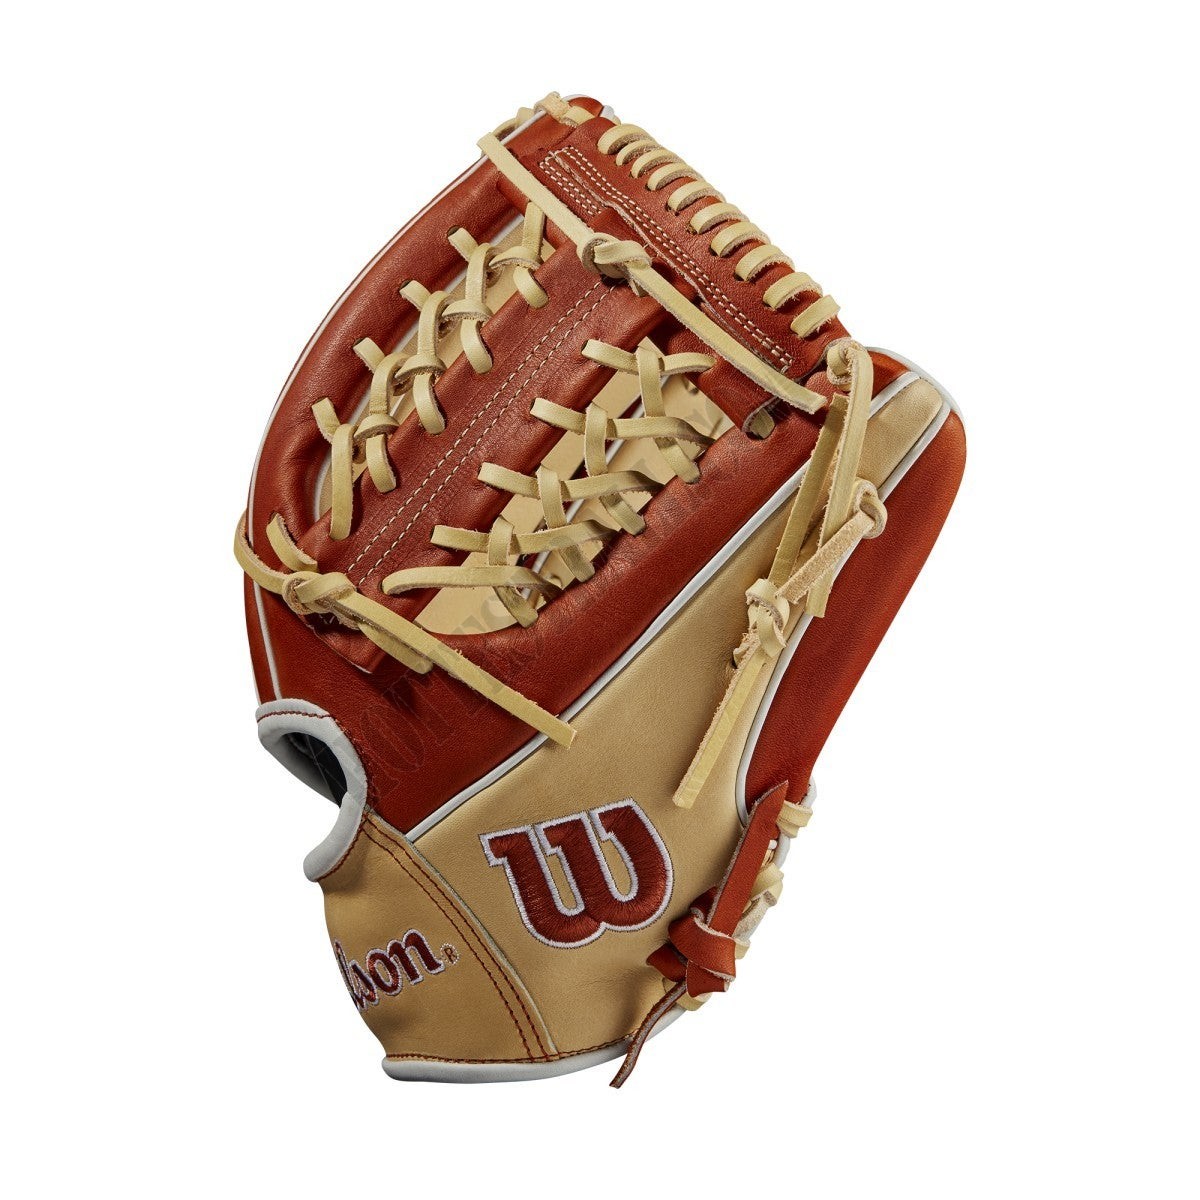 2021 A2000 1789 11.5" Utility Baseball Glove ● Wilson Promotions - -3